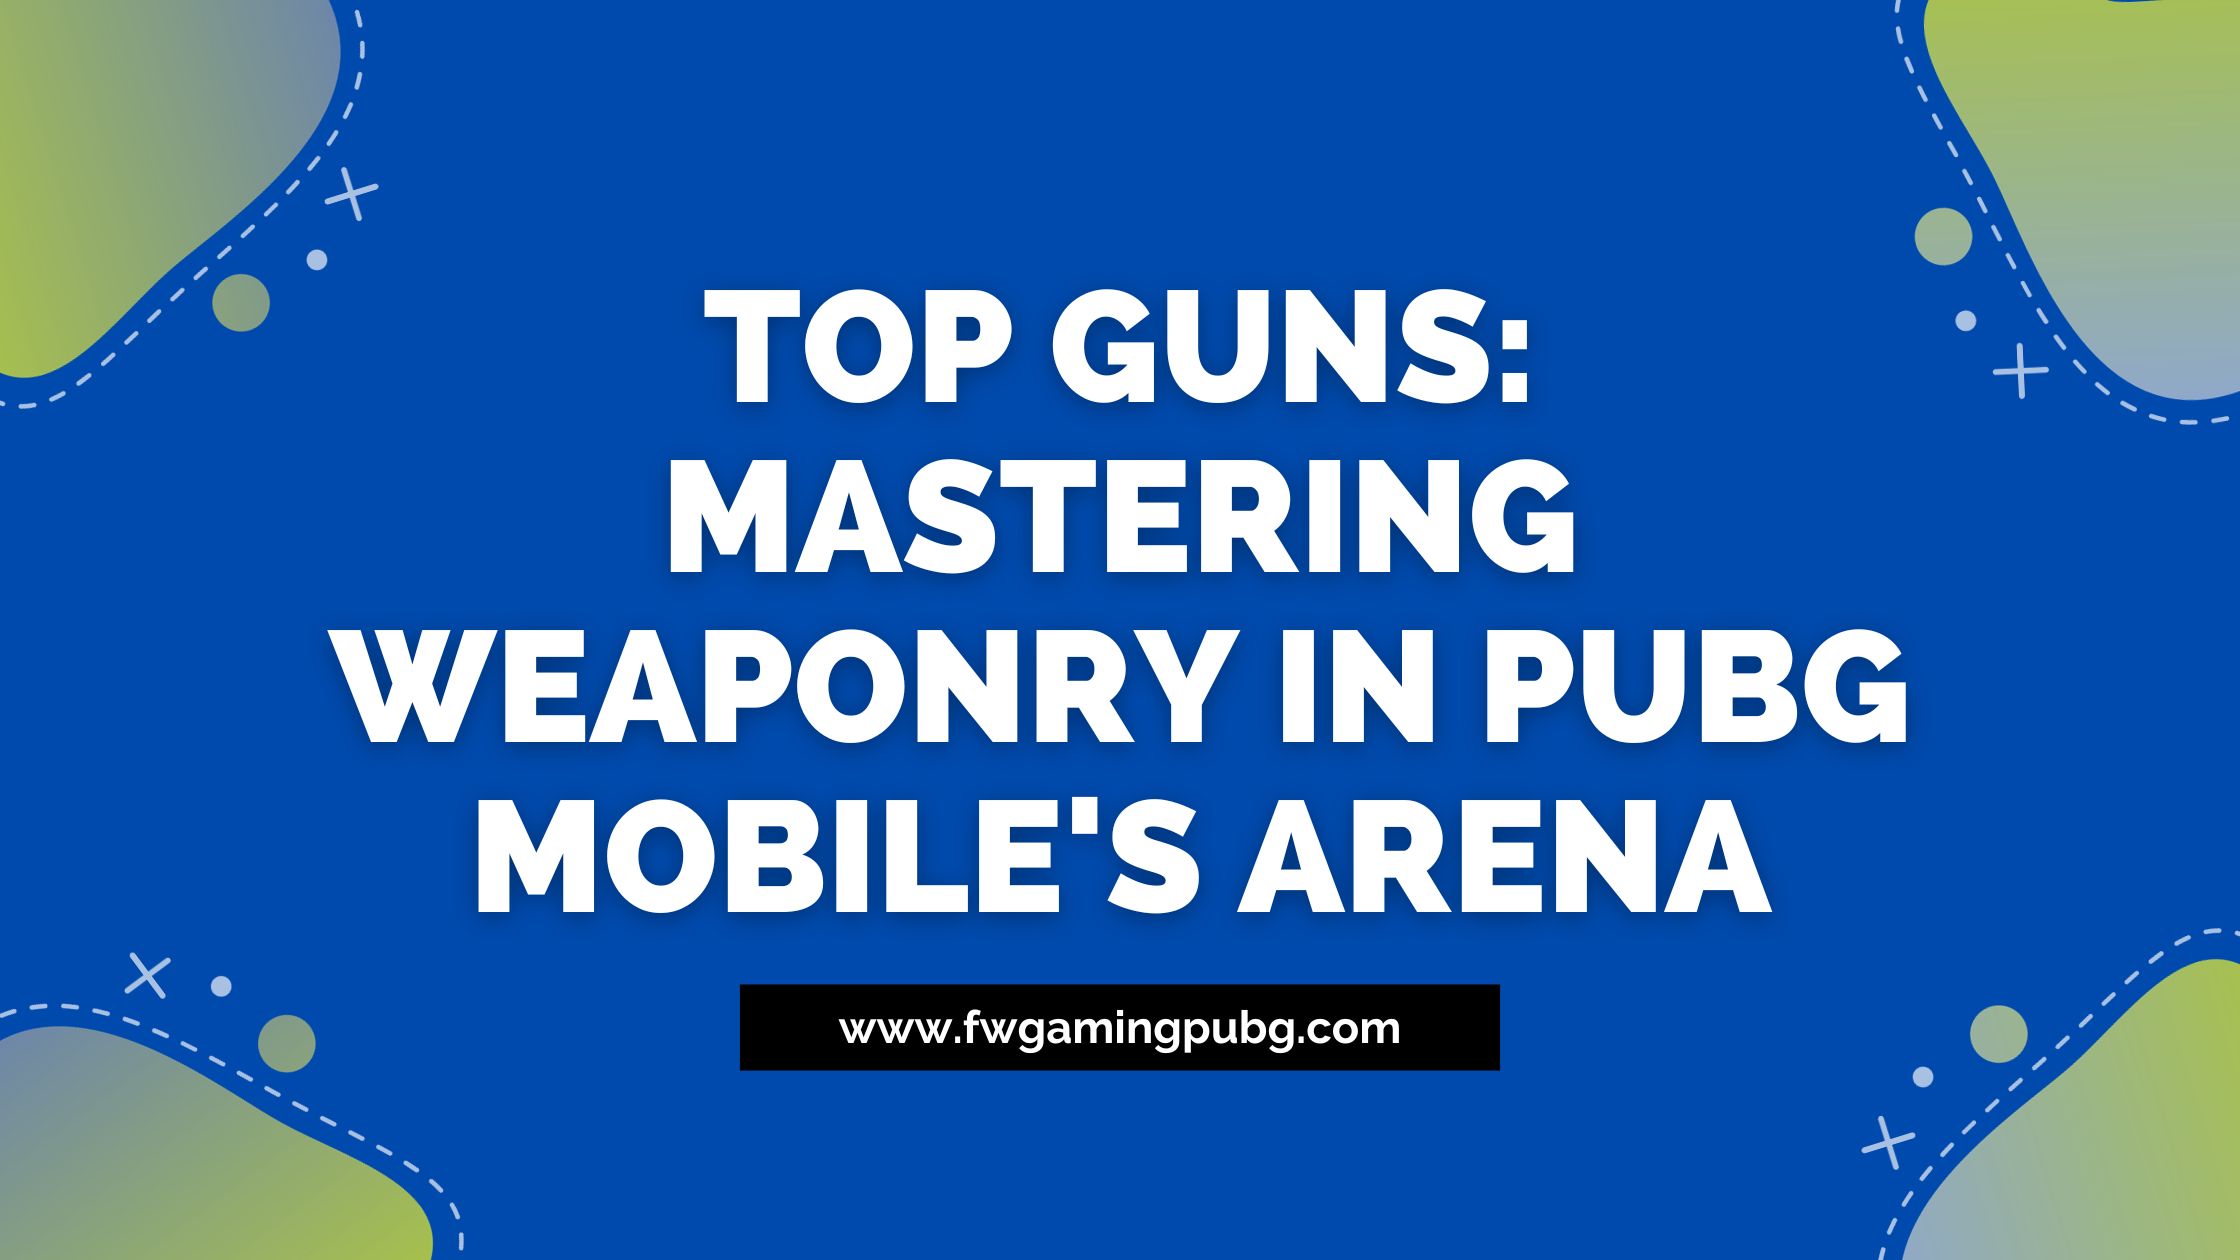 Top Guns: Mastering Weaponry in PUBG MOBILE’s Arena